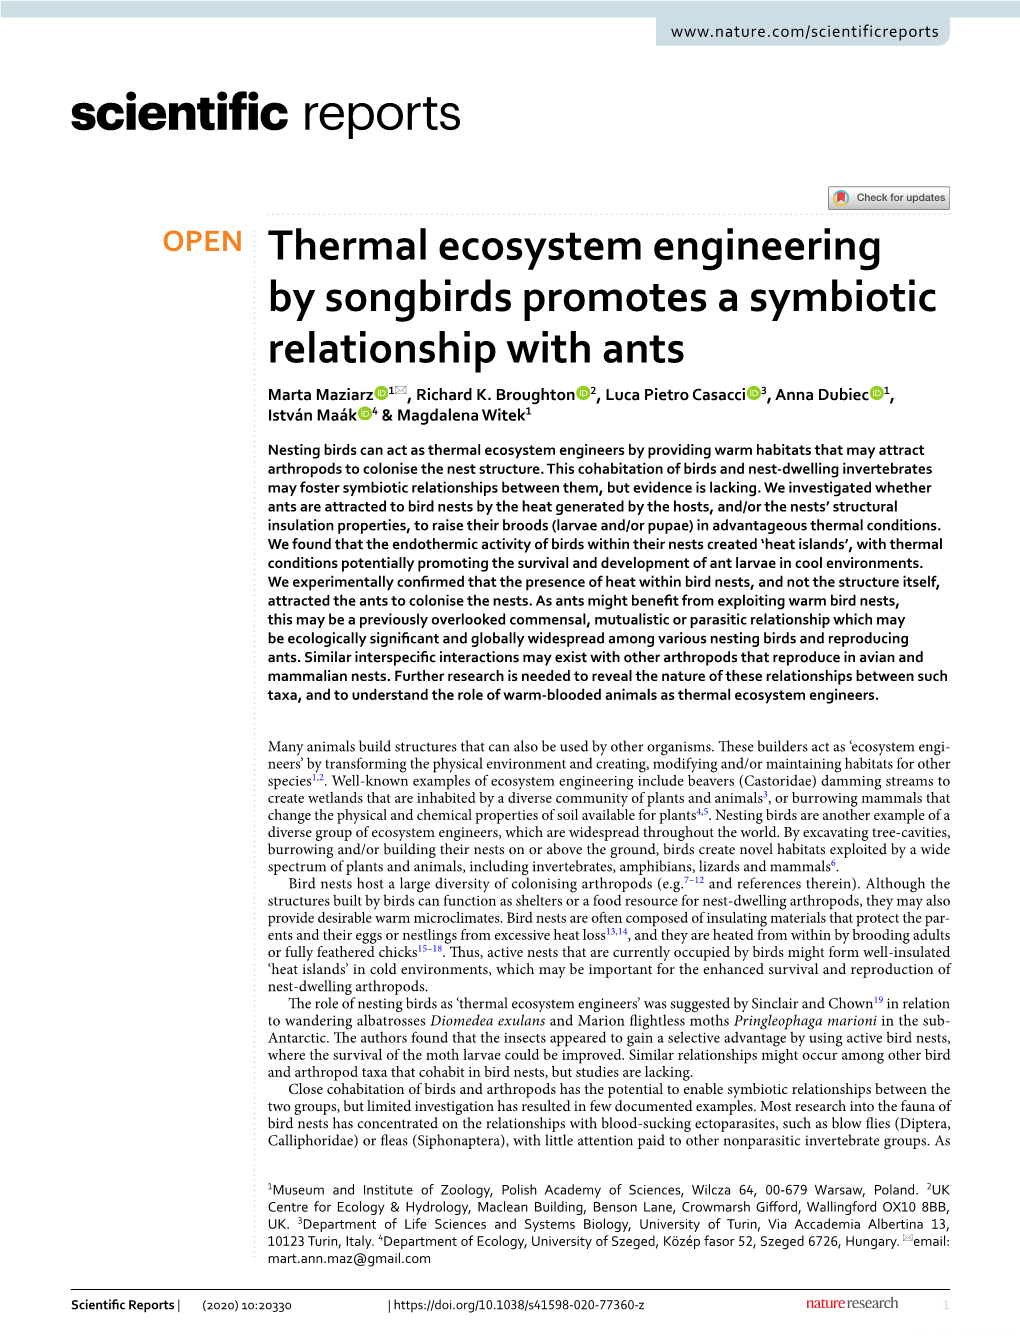 Thermal Ecosystem Engineering by Songbirds Promotes a Symbiotic Relationship with Ants Marta Maziarz 1*, Richard K